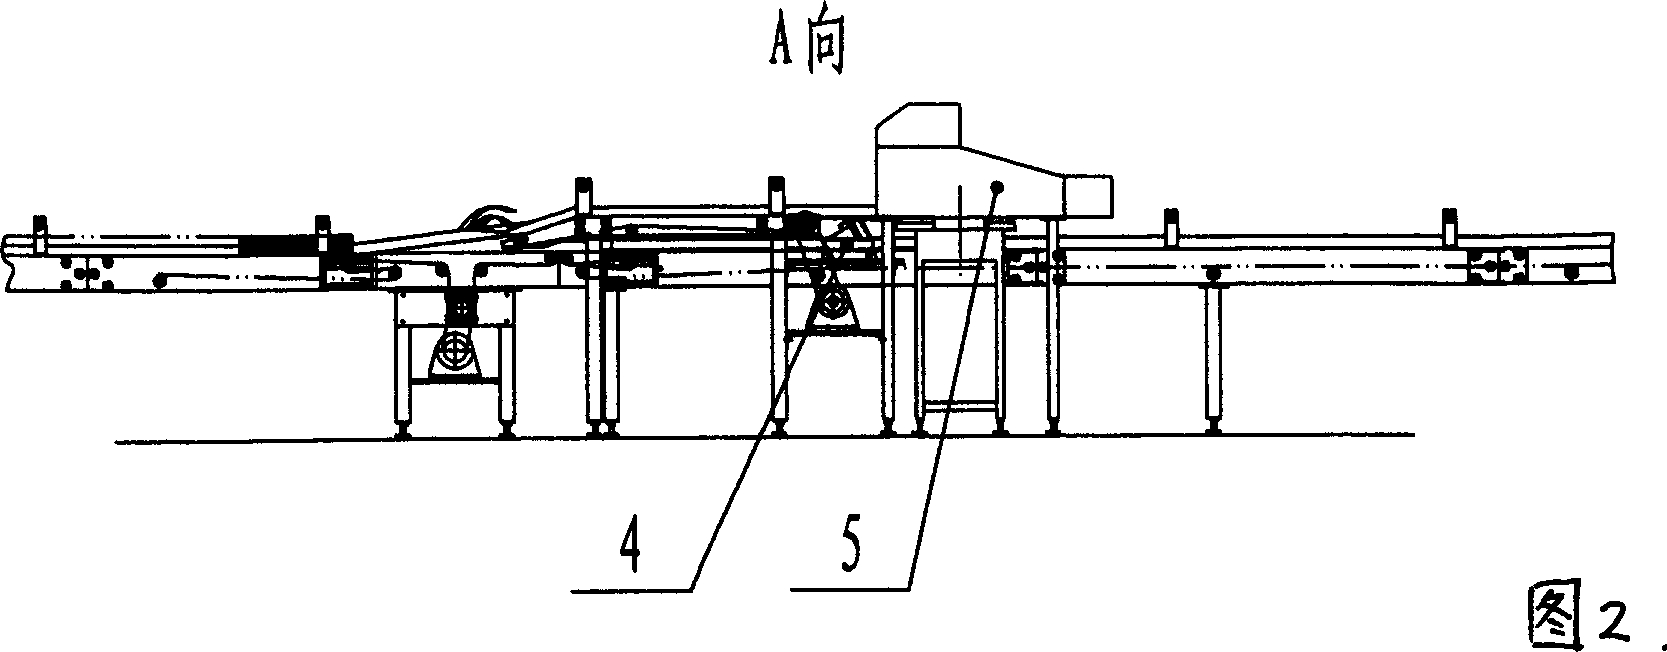 Automatic-feeding metered-packing biscuit production process